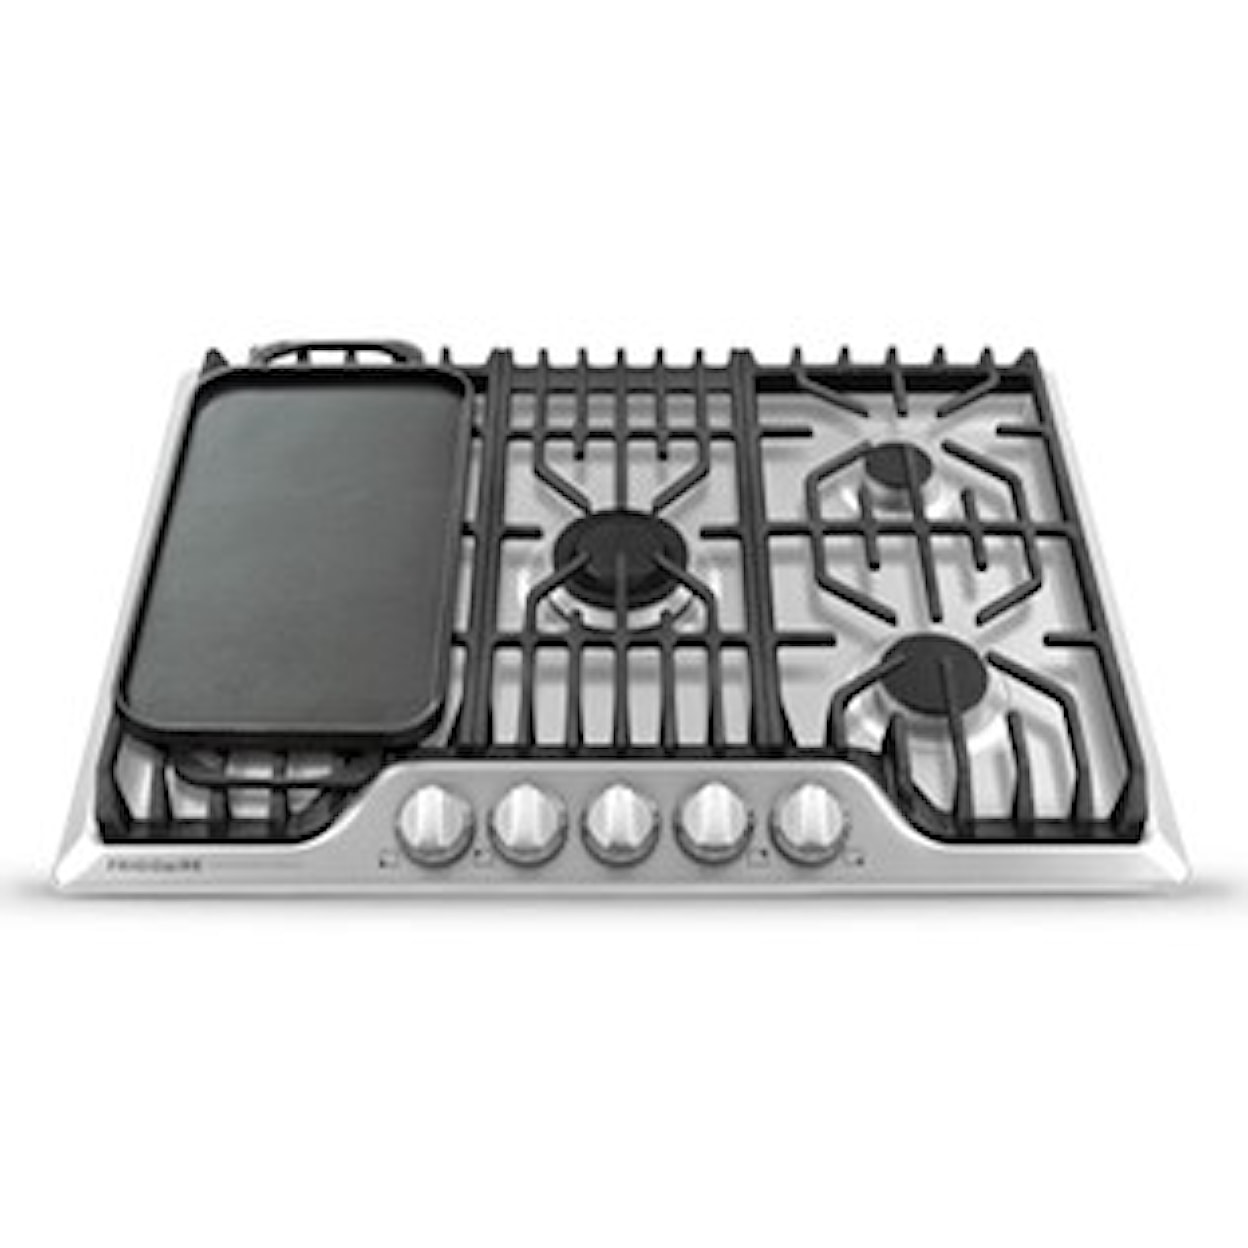 Frigidaire Professional Collection - Cooktops 30" Frigidaire Professional Gas Cooktop